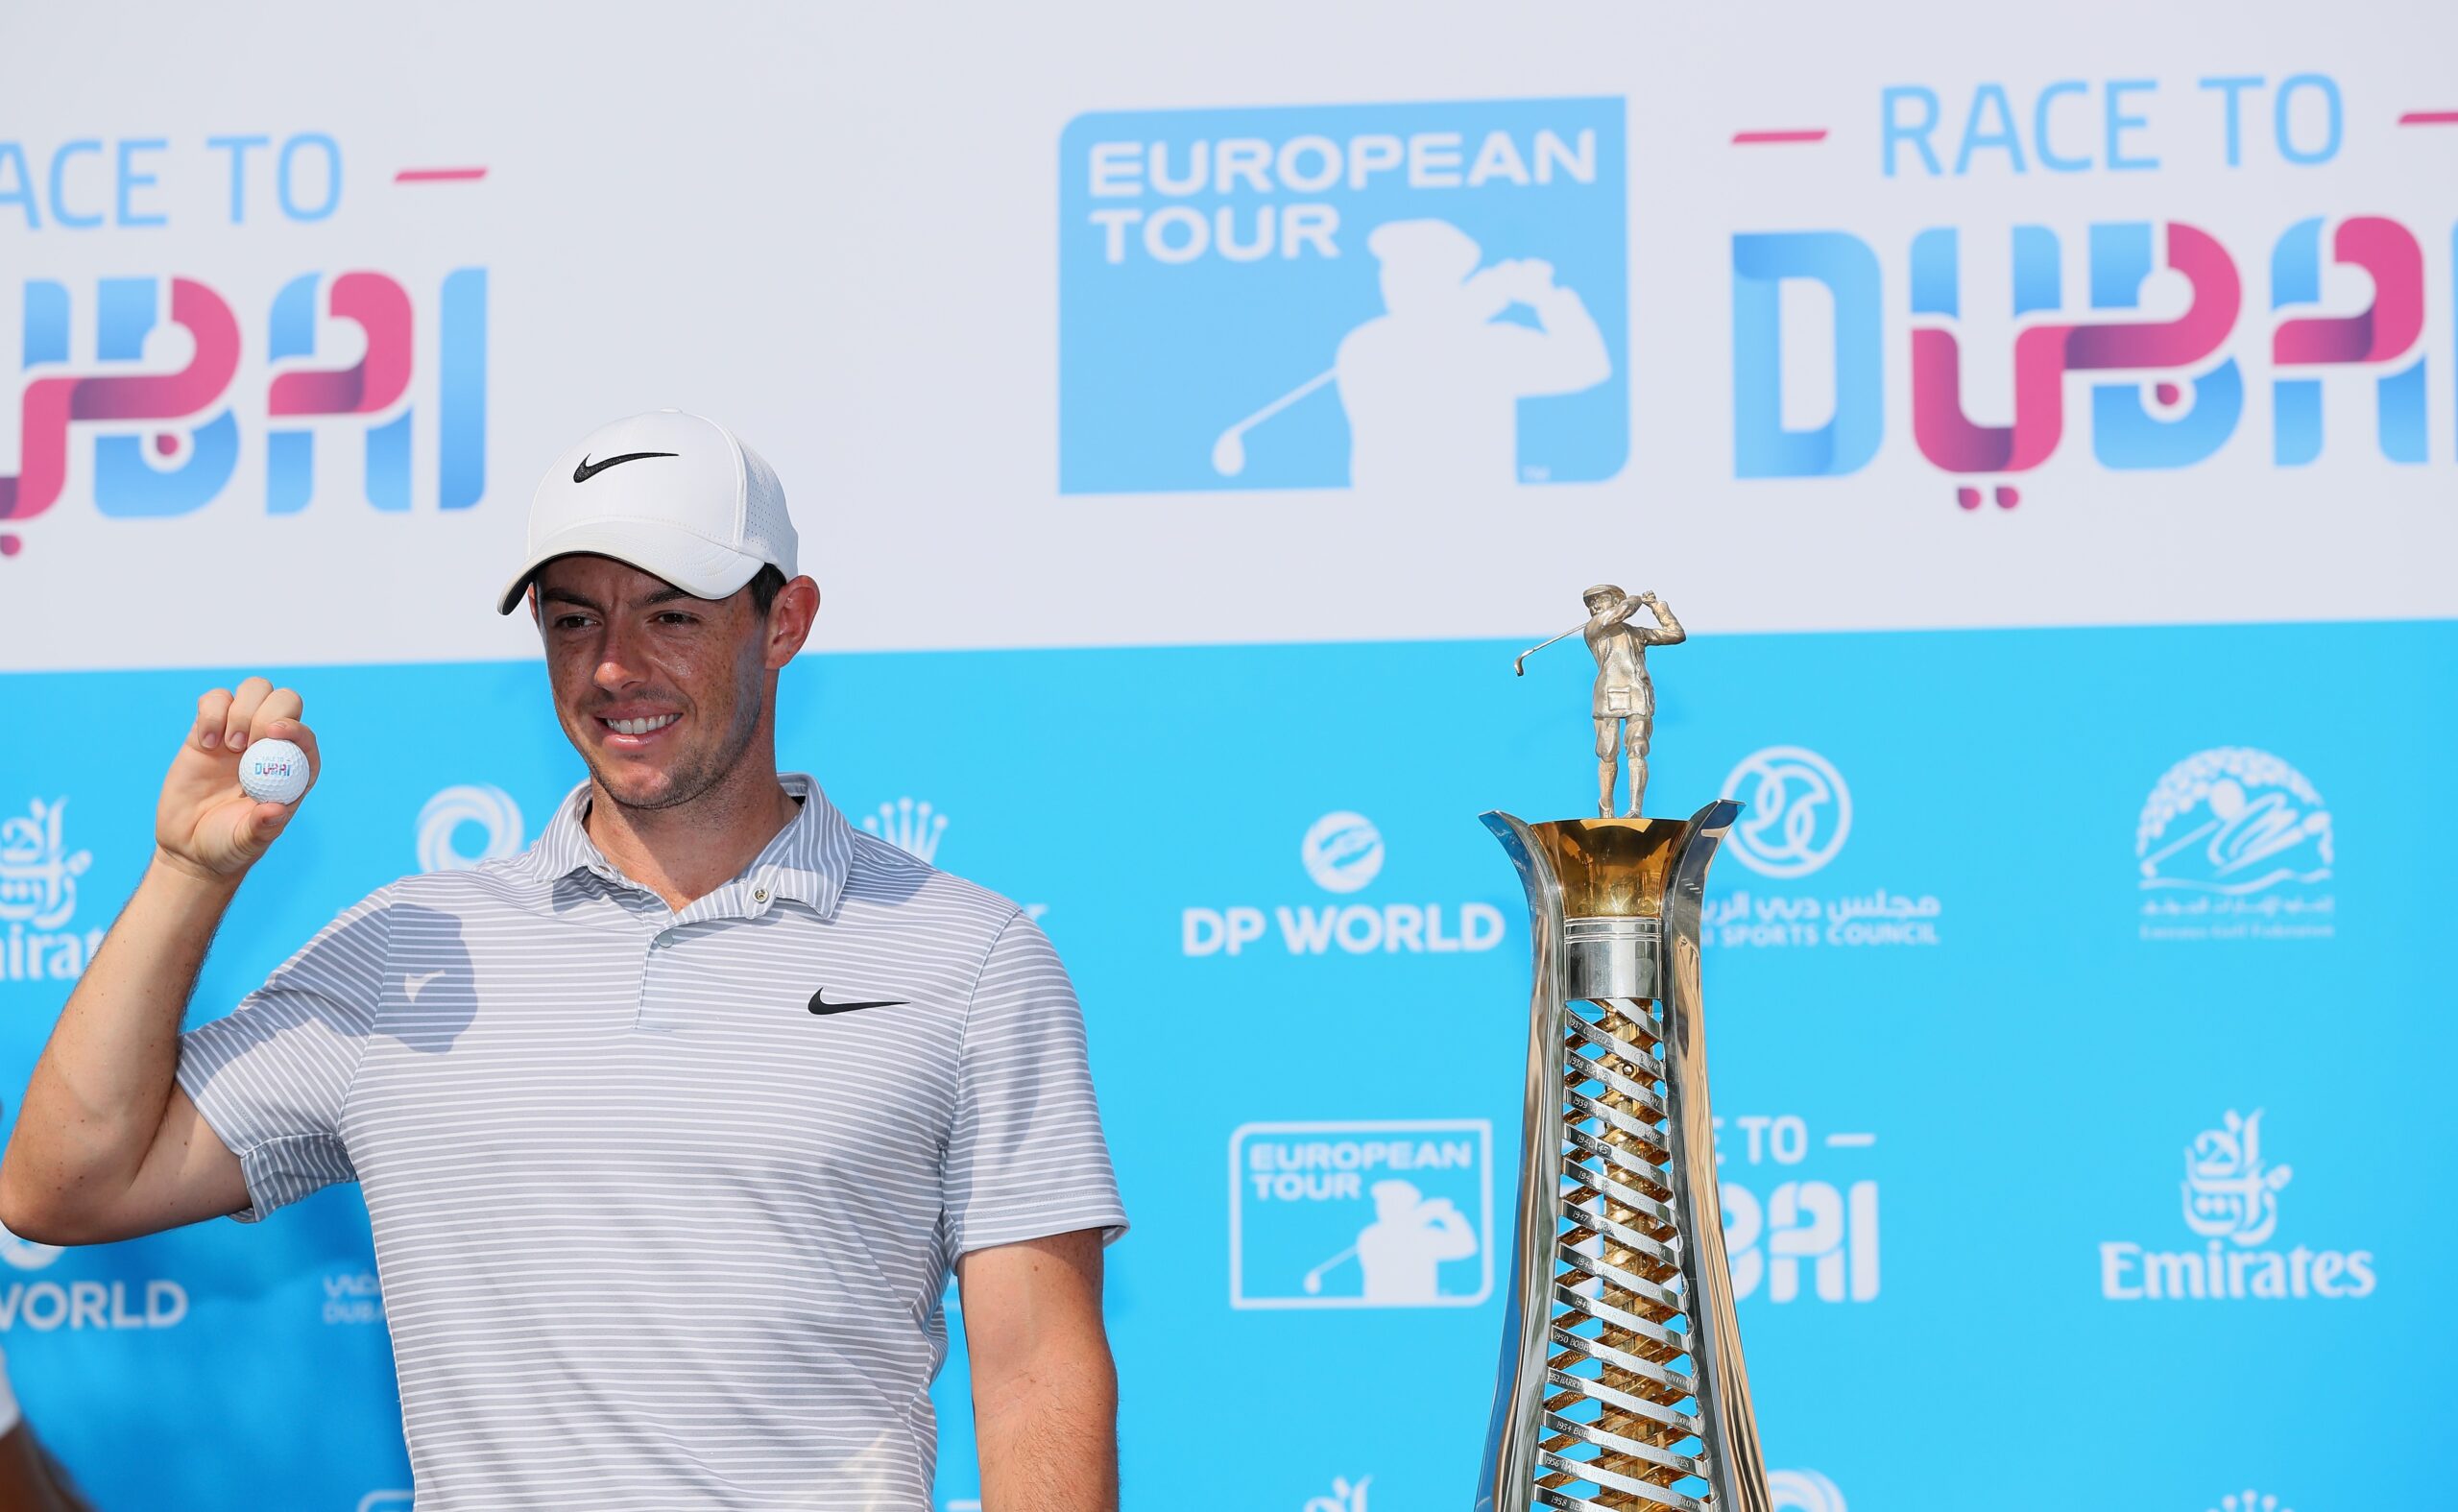 The main talking points of the 2018 European Tour schedule